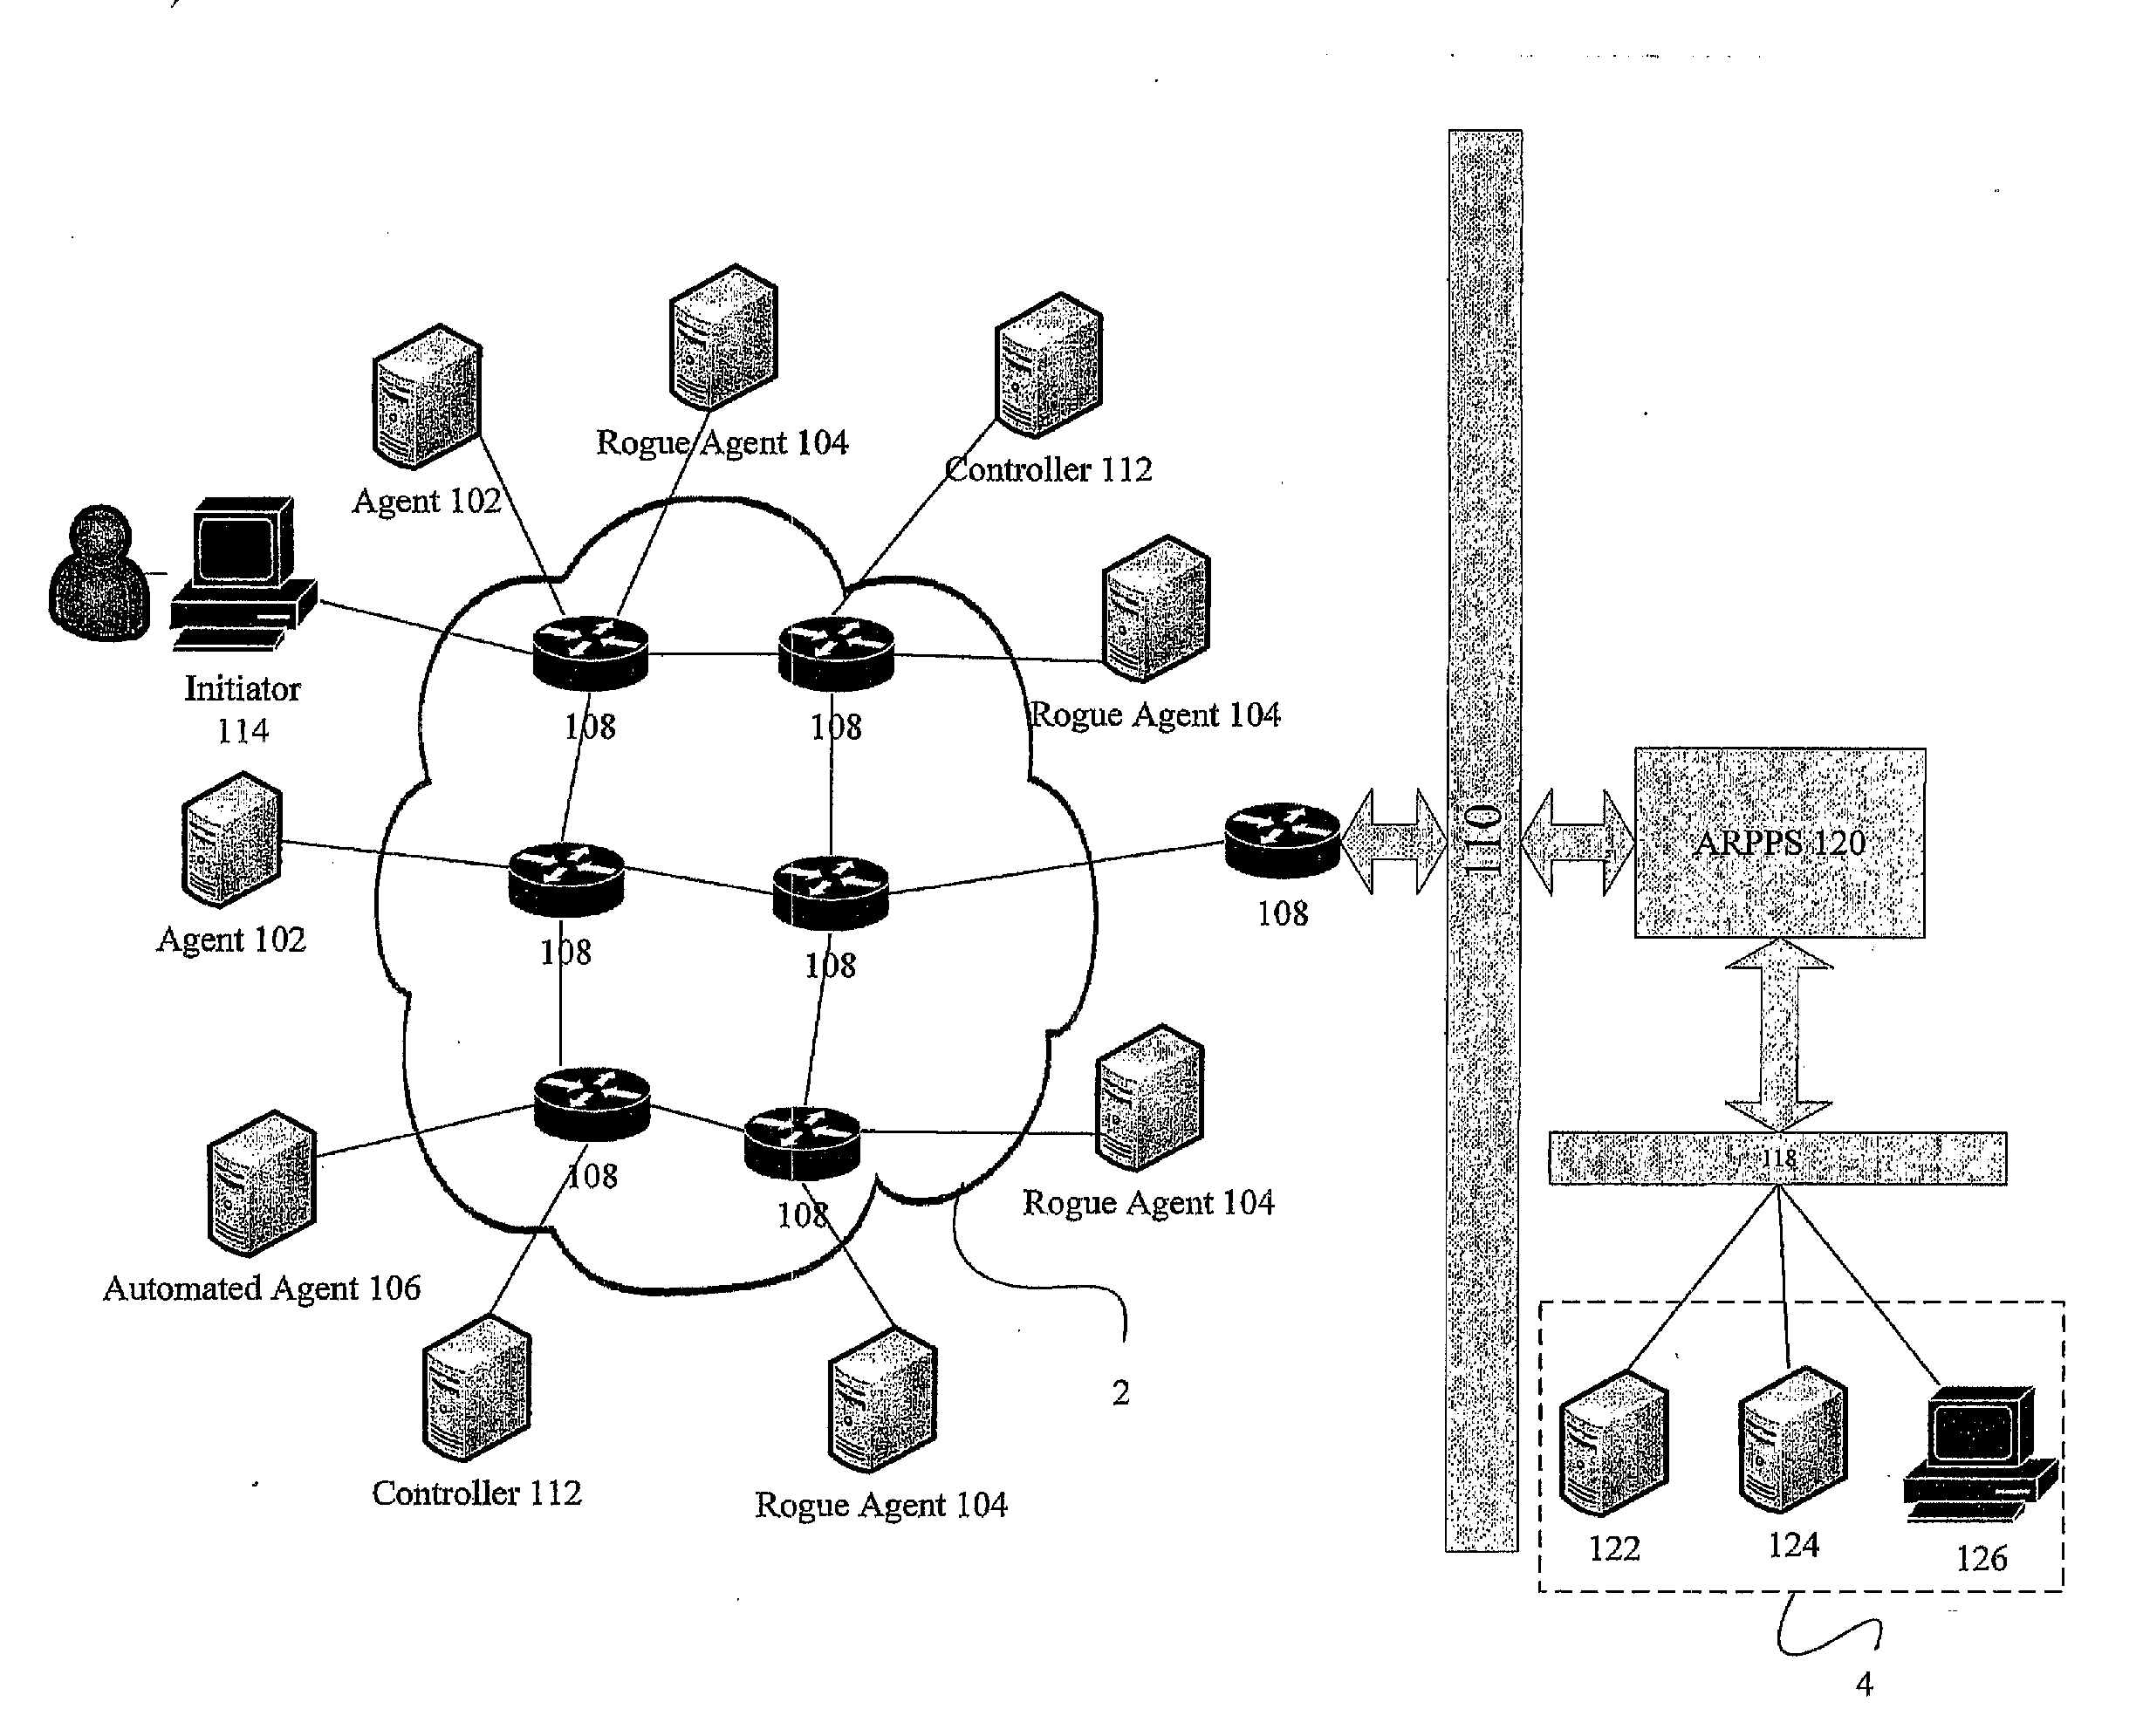 System and Method of Active Remediation and Passive Protection Against Cyber Attacks